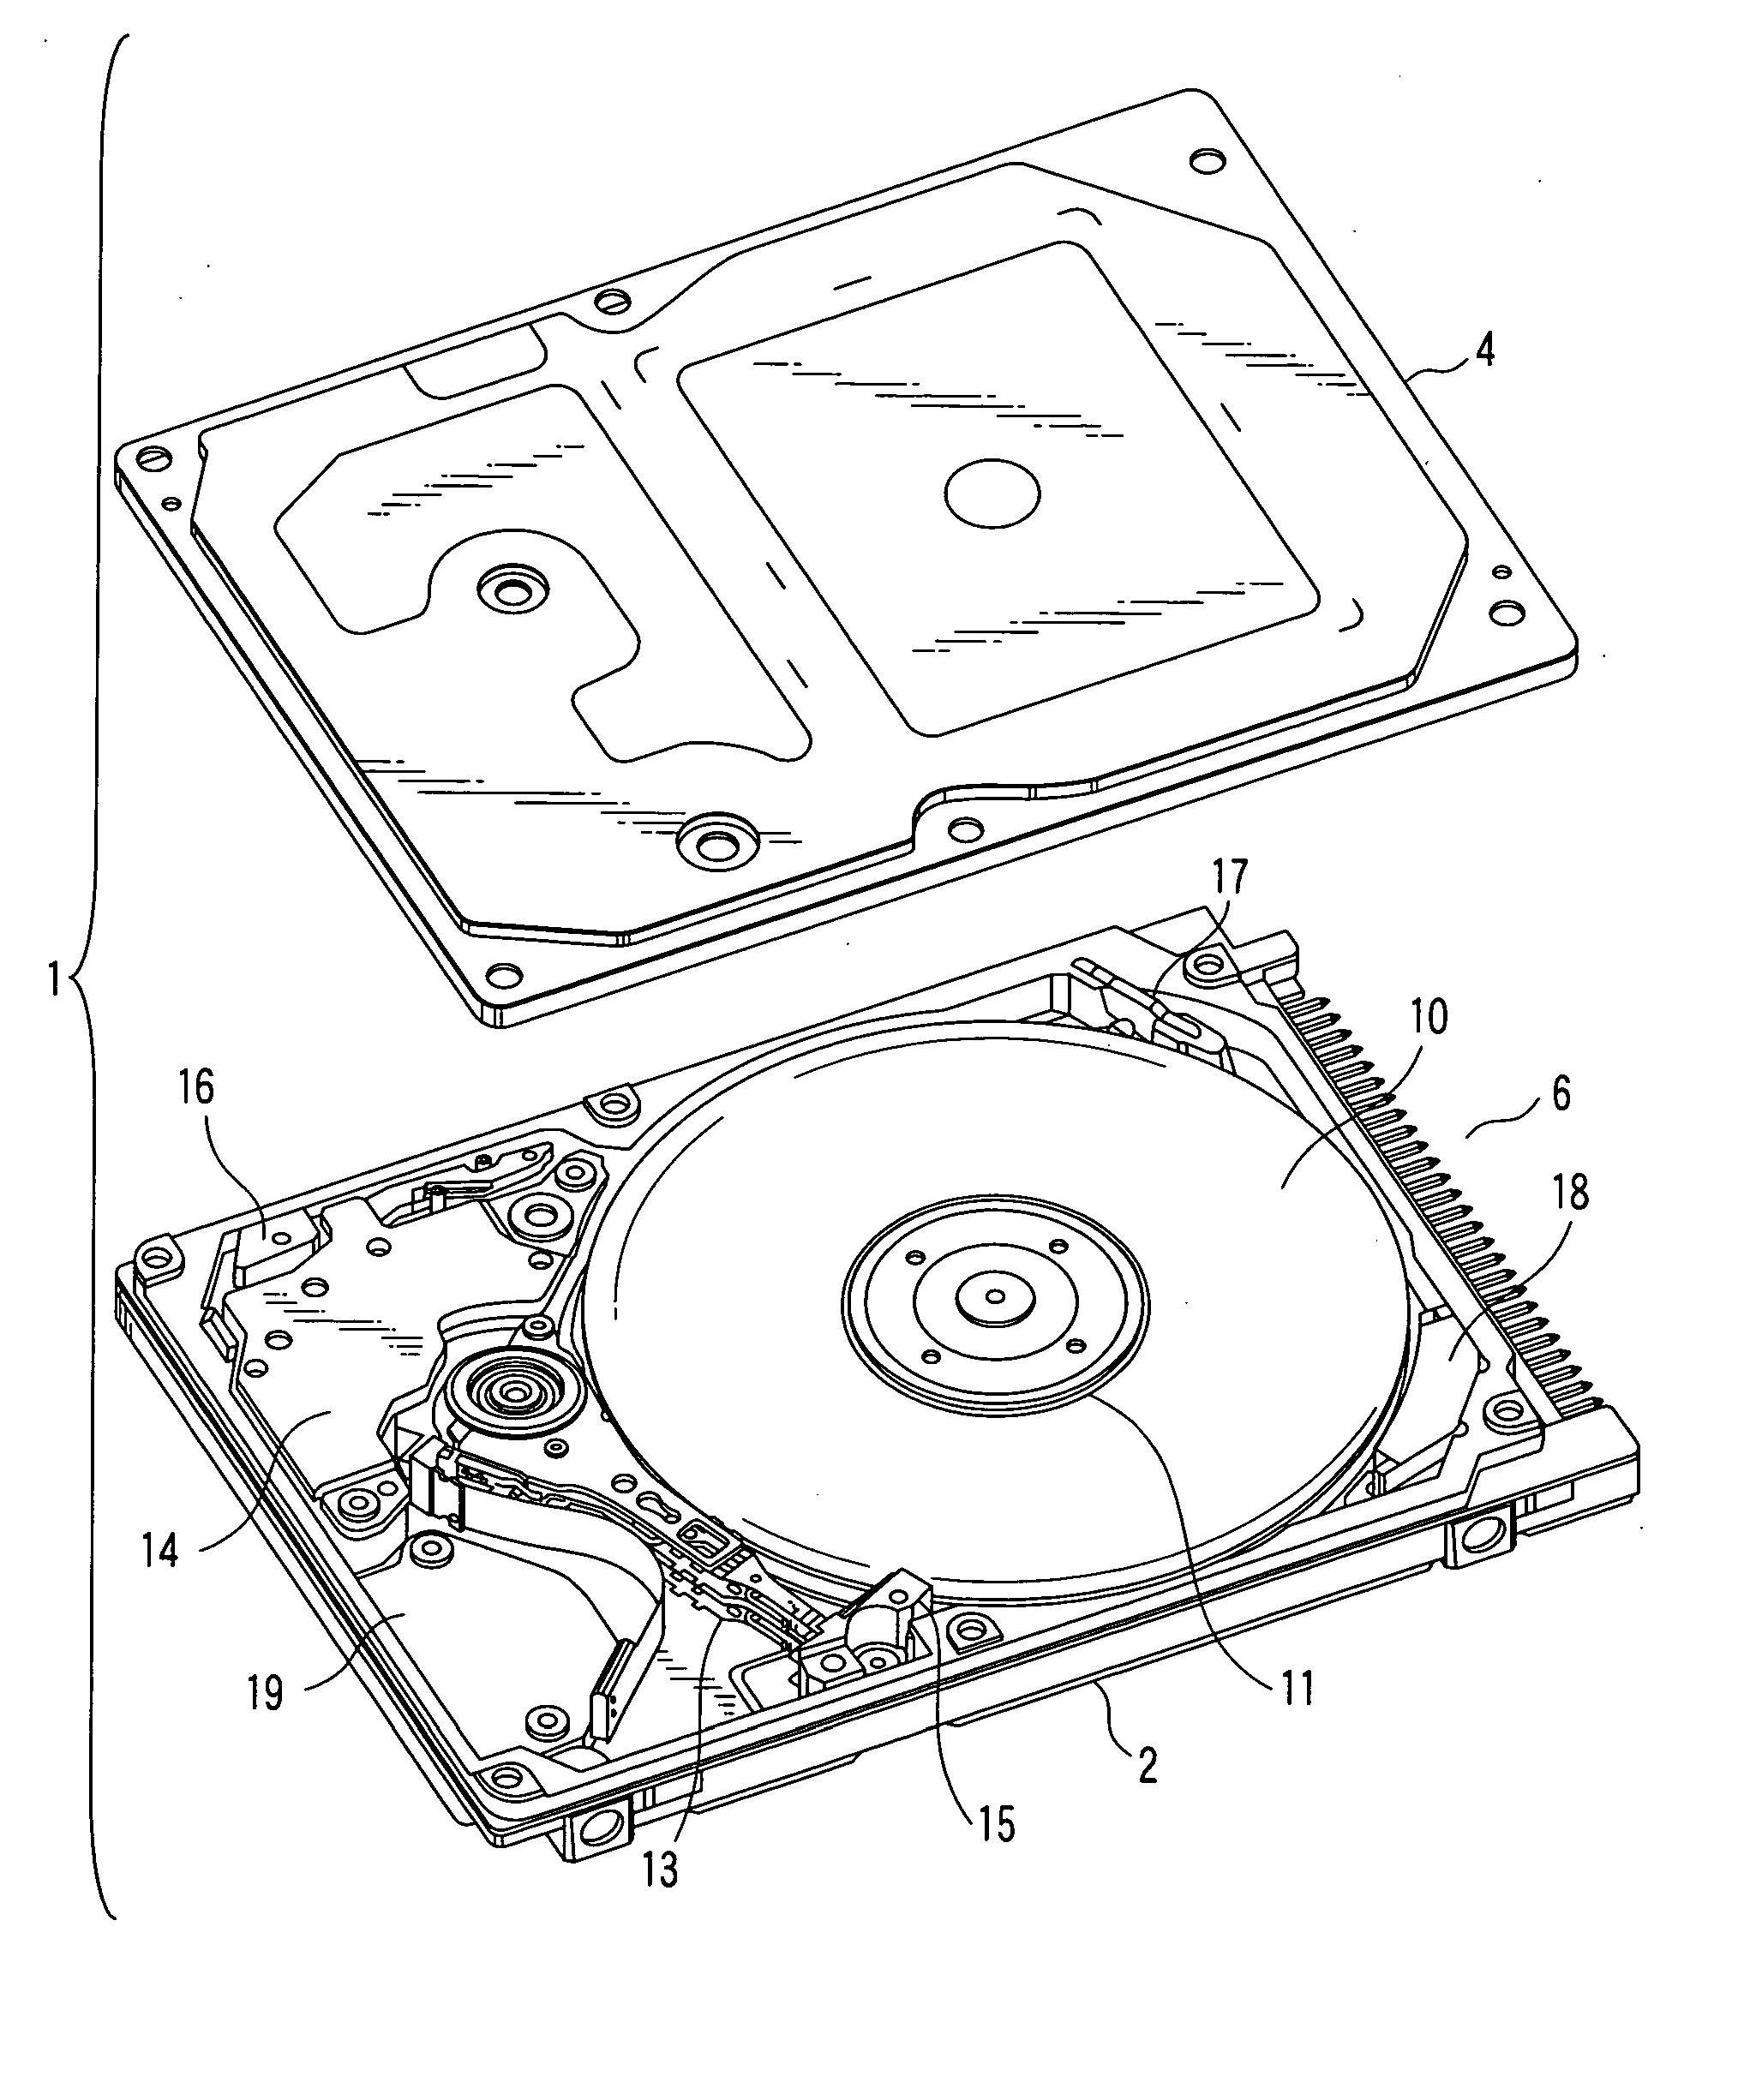 Disk device